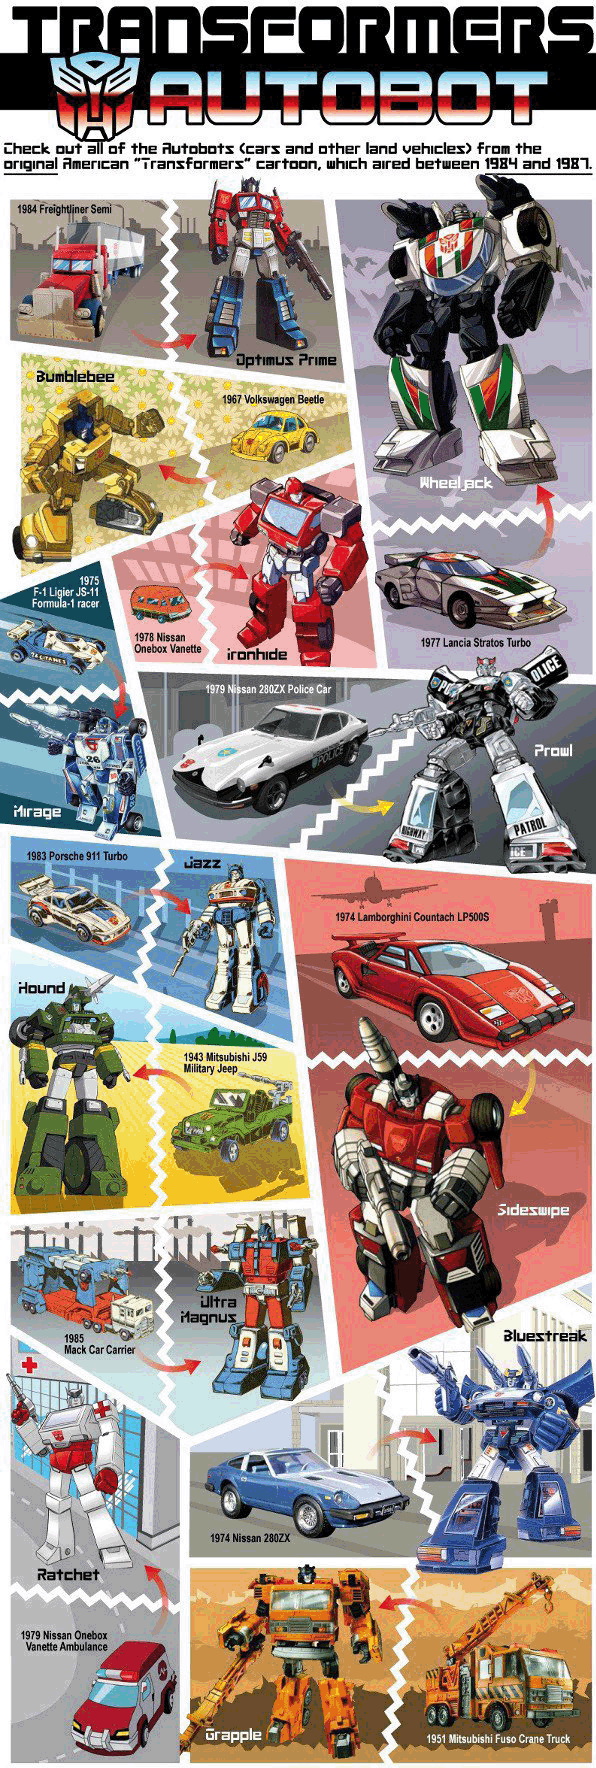 Transformers: The Cars Behind The Robots [Infographic]